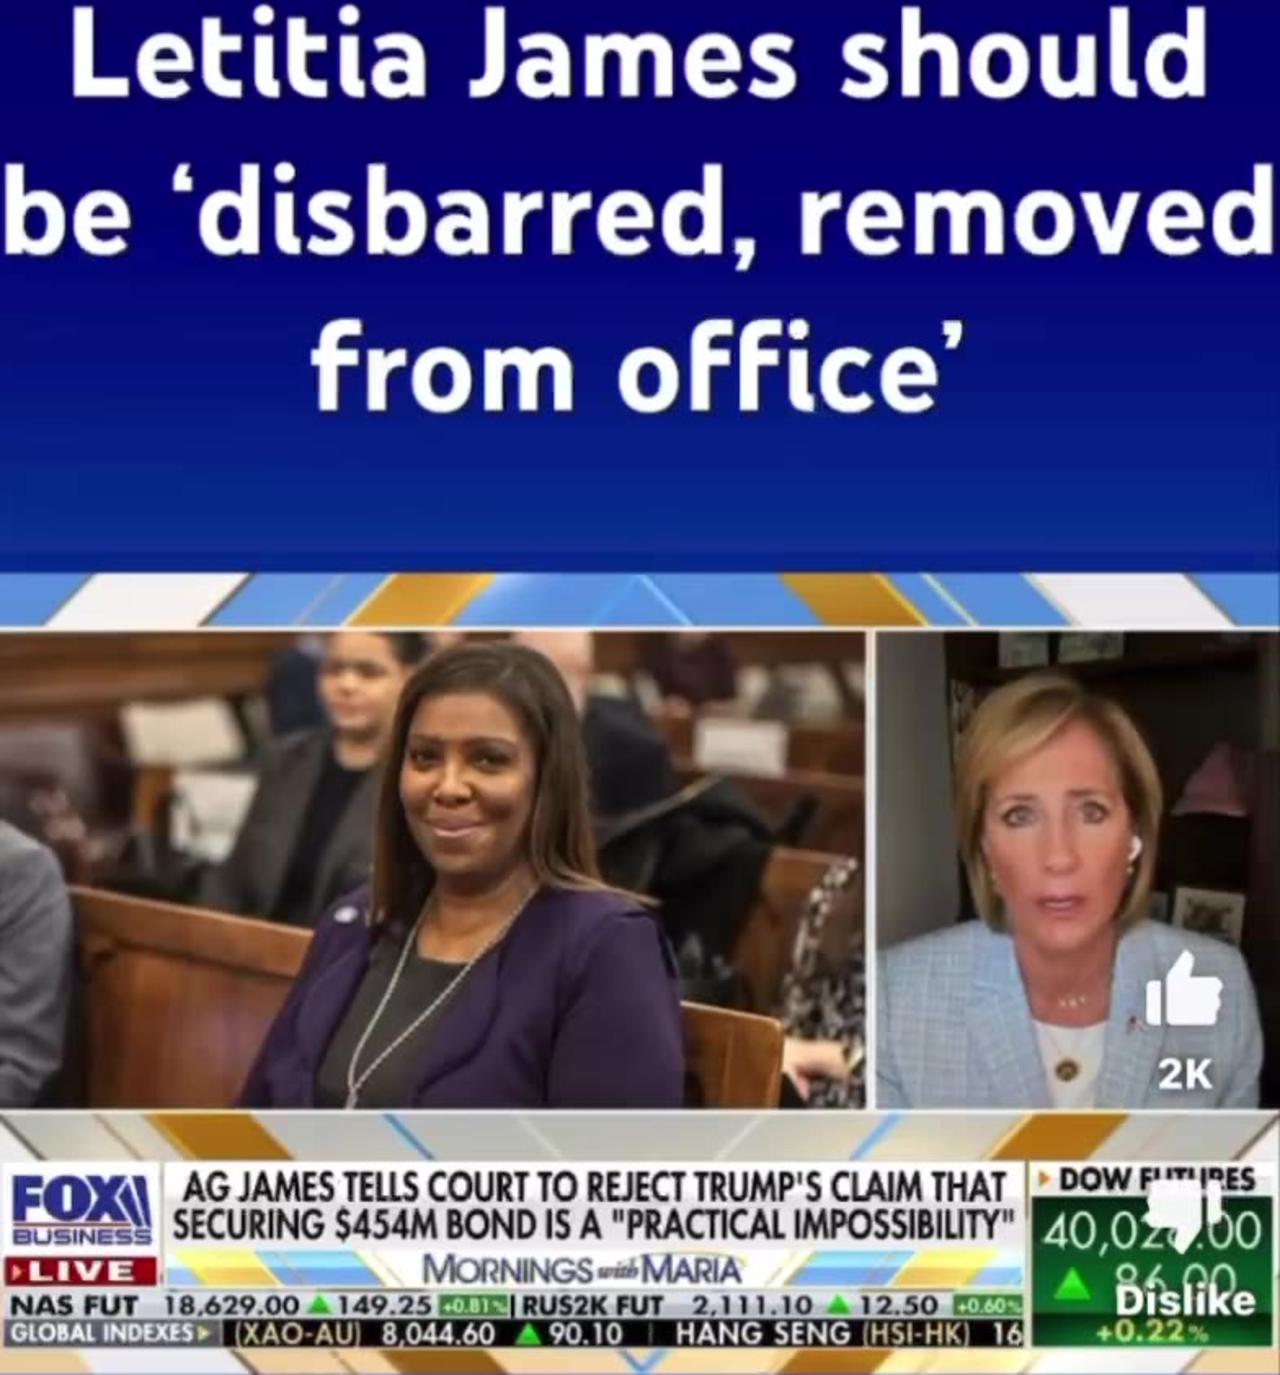 Leticia James should be disbarred and removed from office